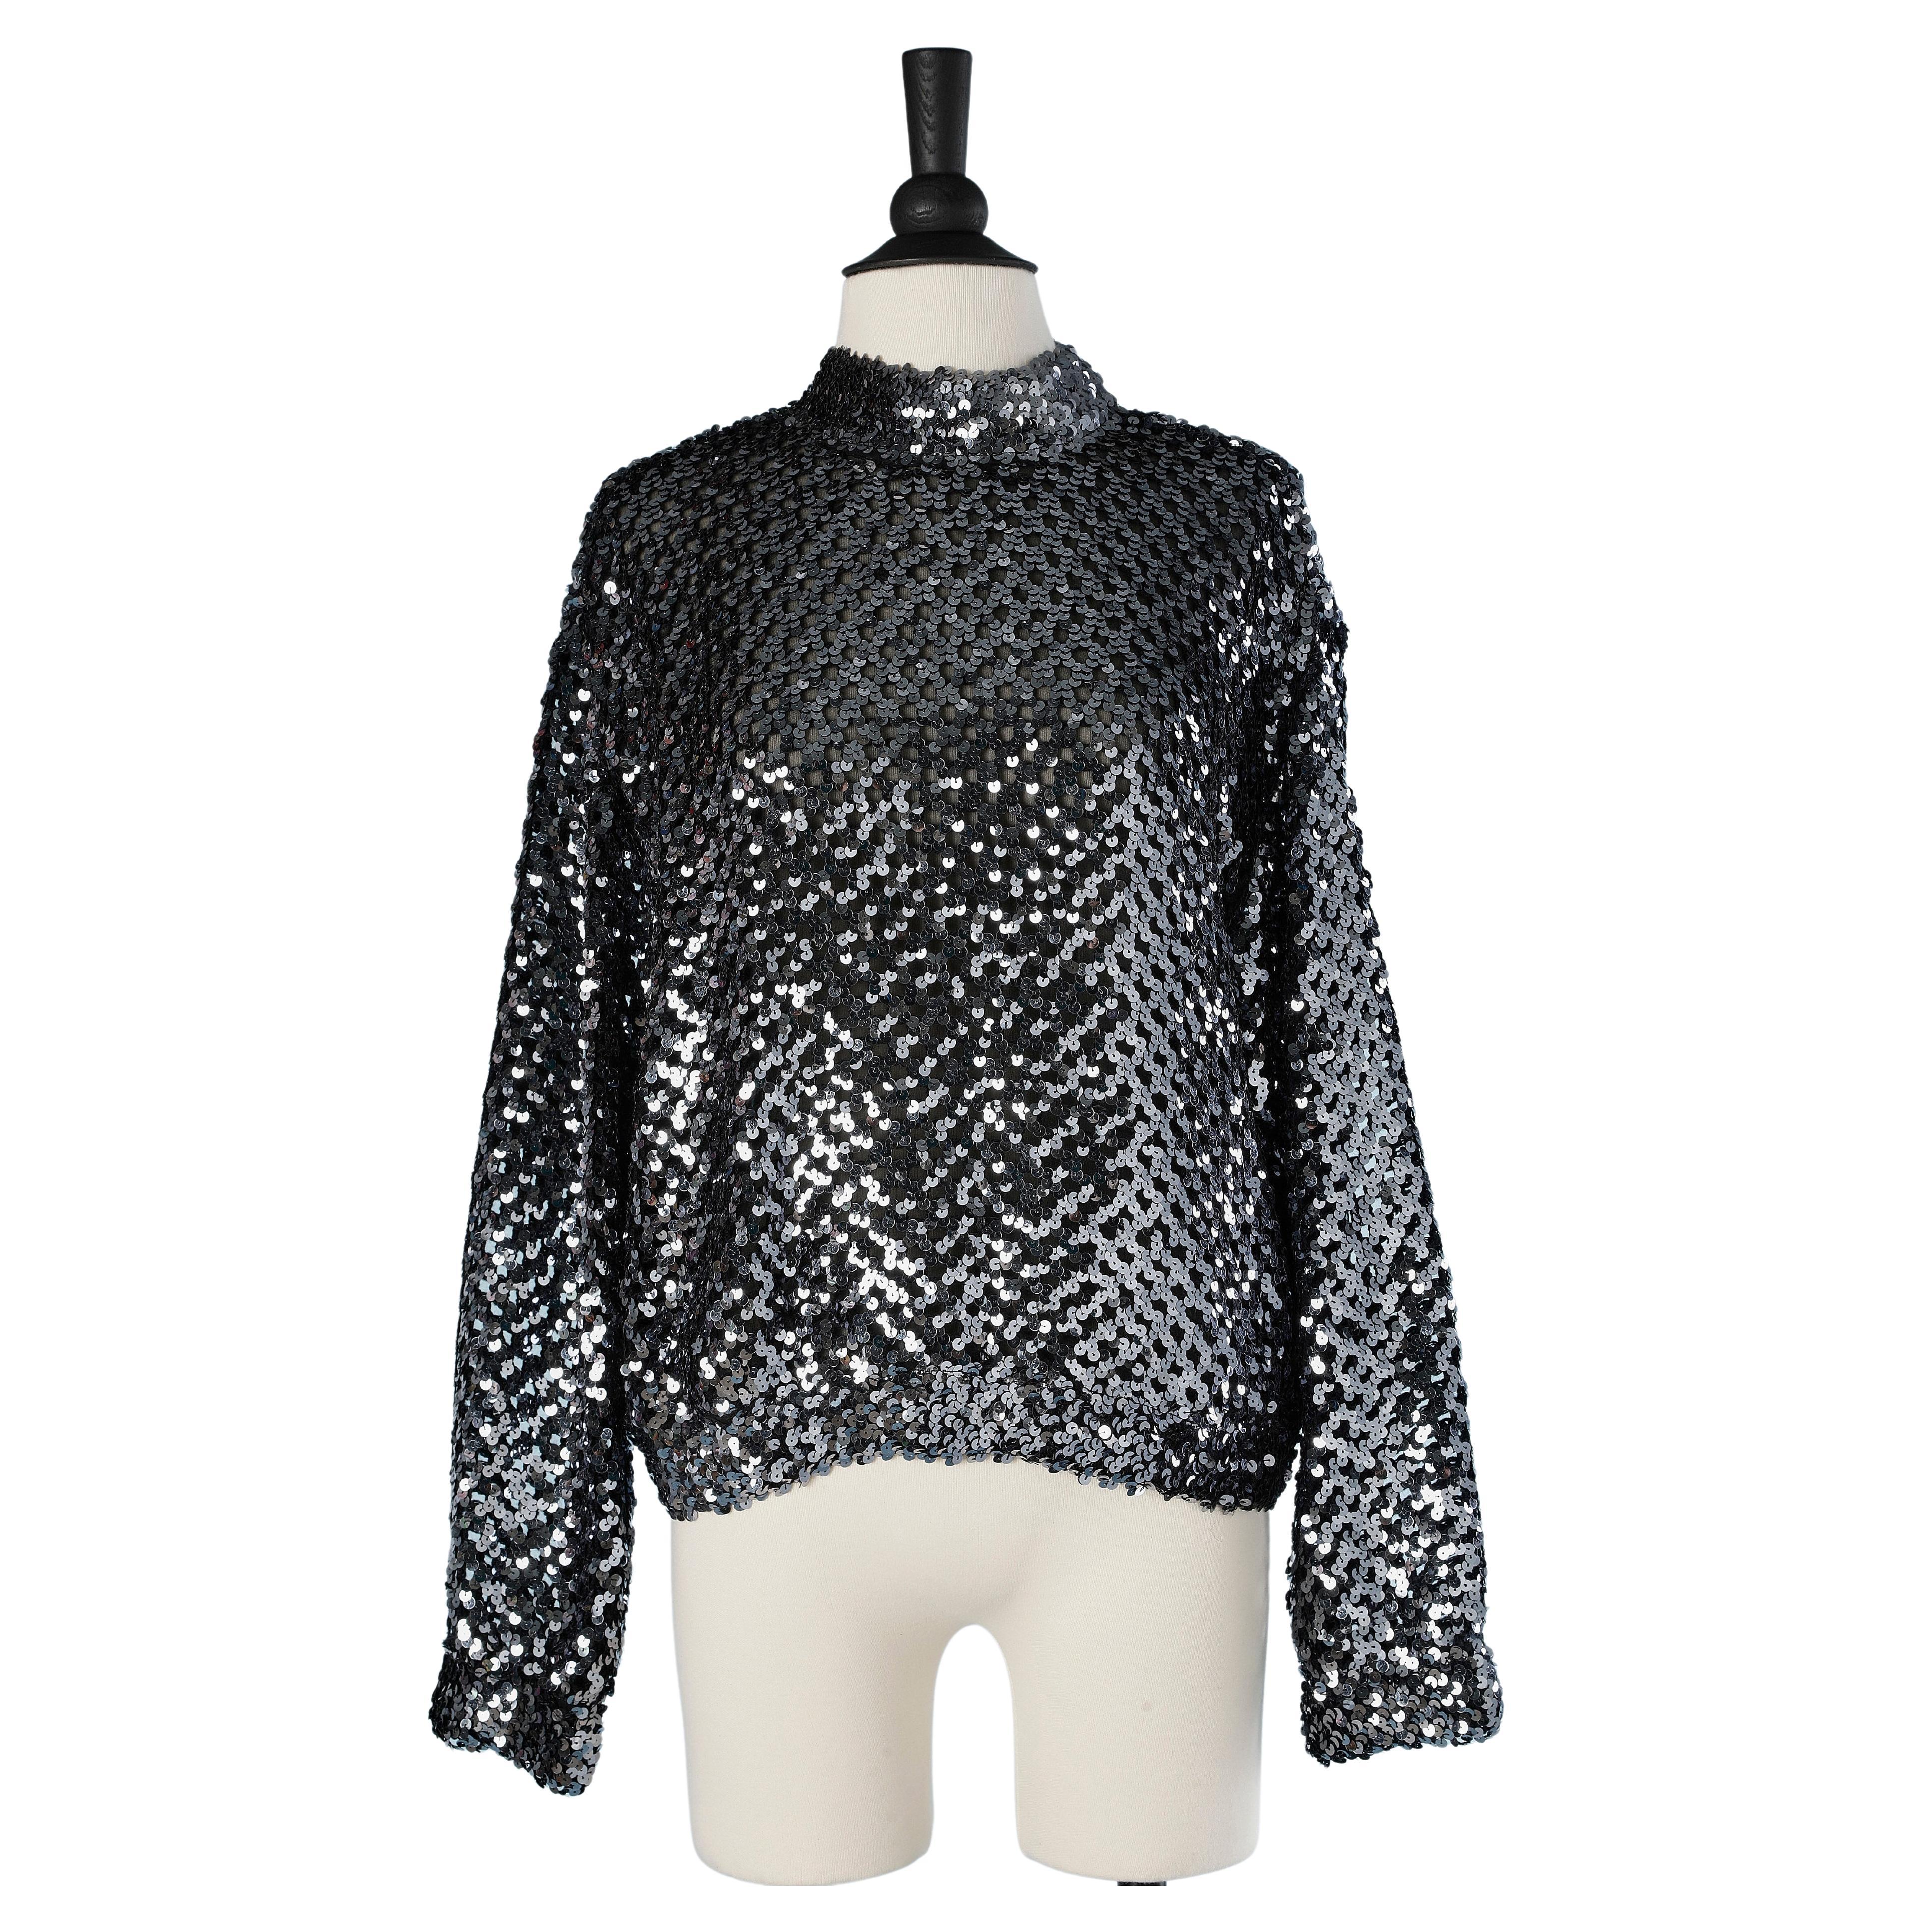 Silver sequin sweater on knit base and black chiffon lining Annie Corval  For Sale